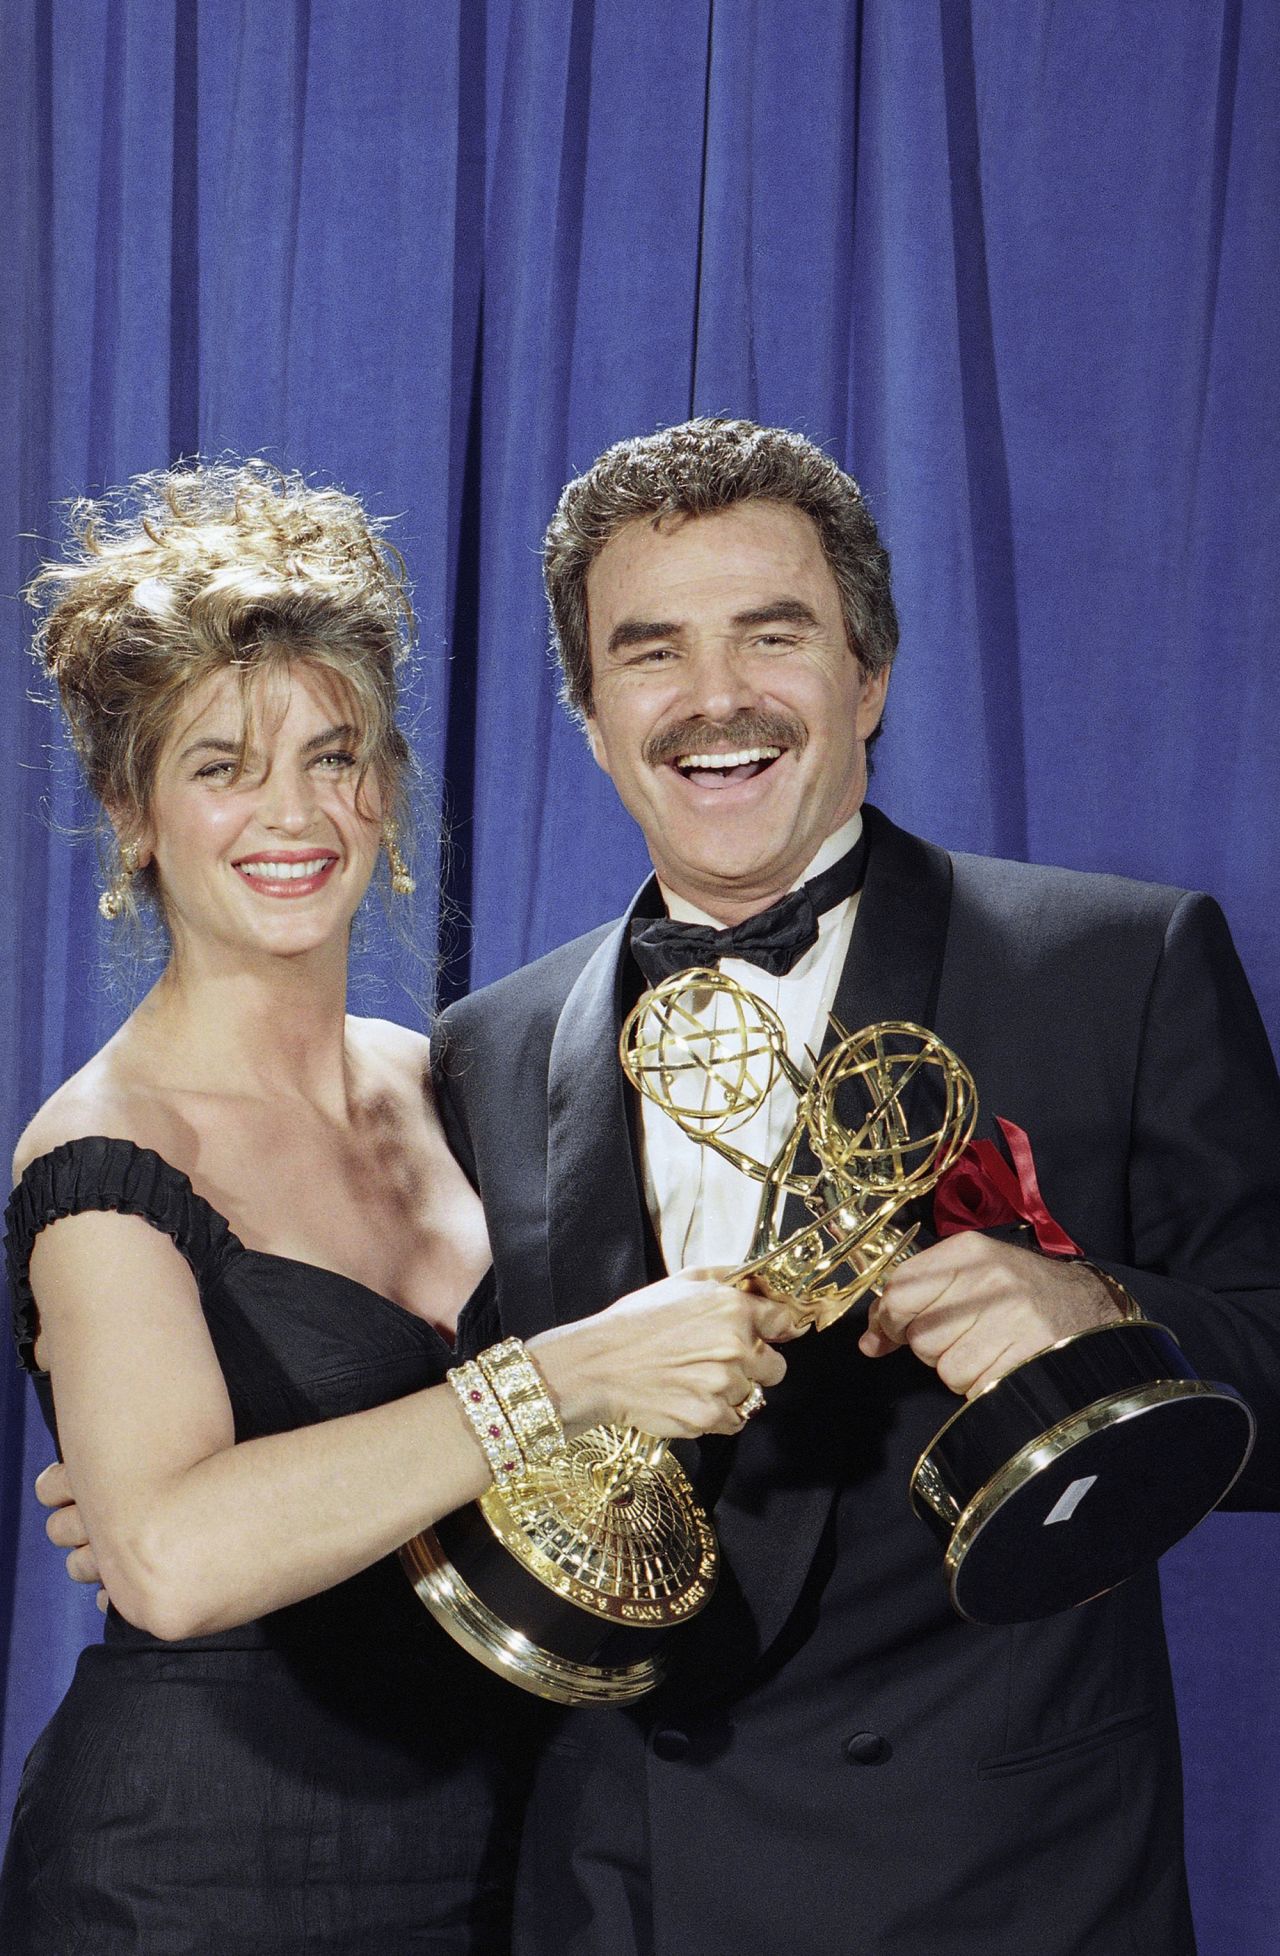 Alley and Burt Reynolds share a laugh backstage at the Emmy Awards in Pasadena, California in 1991. Both won awards for best acting in a comedy series, Alley for "Cheers" and Reynolds for "Evening Shade."